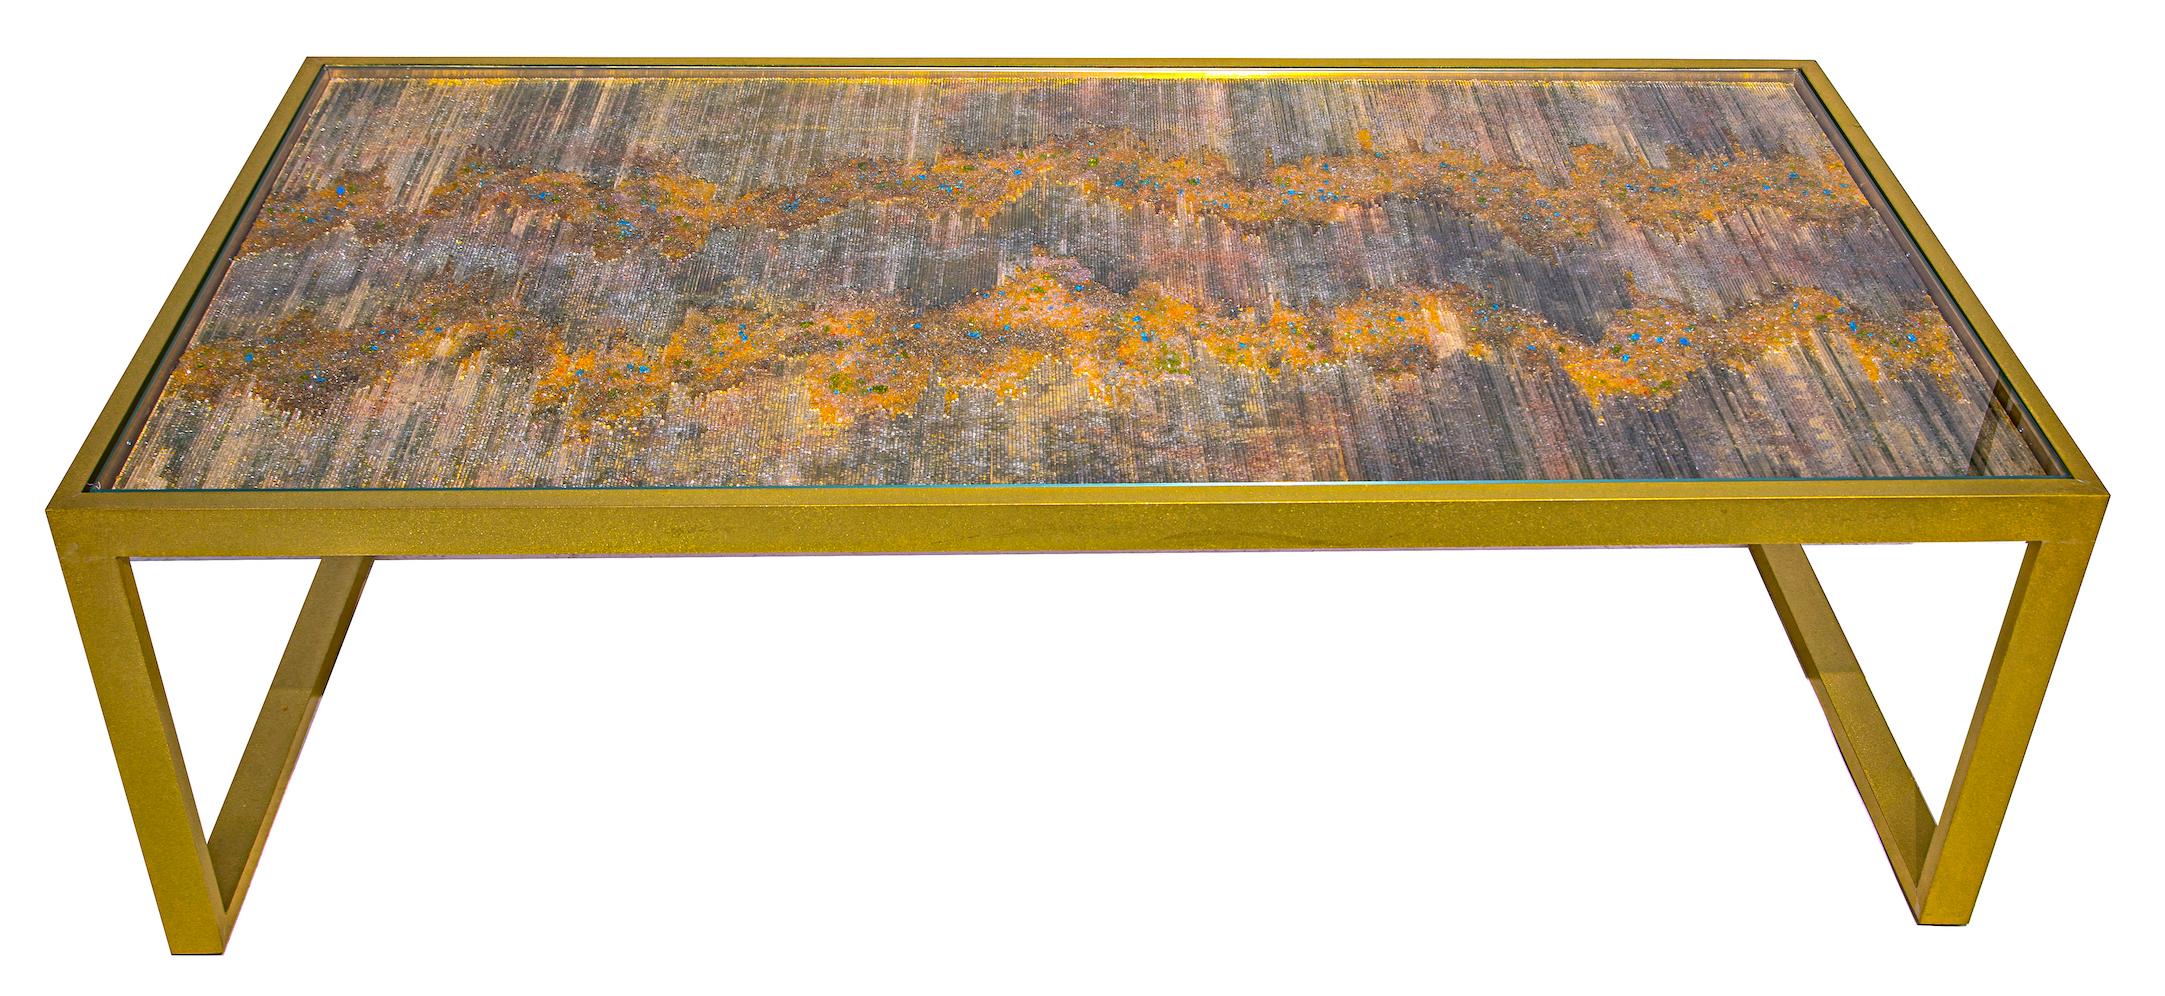 “AURORA” is a one-of-a-kind coffee-table, designed and manufactured by KalaRara. The tabletop realised on an aluminium sheet covered in gold, silver and copper leaf overlaid with Murano glass rods with insets of crushed Murano glass and acrylic. The